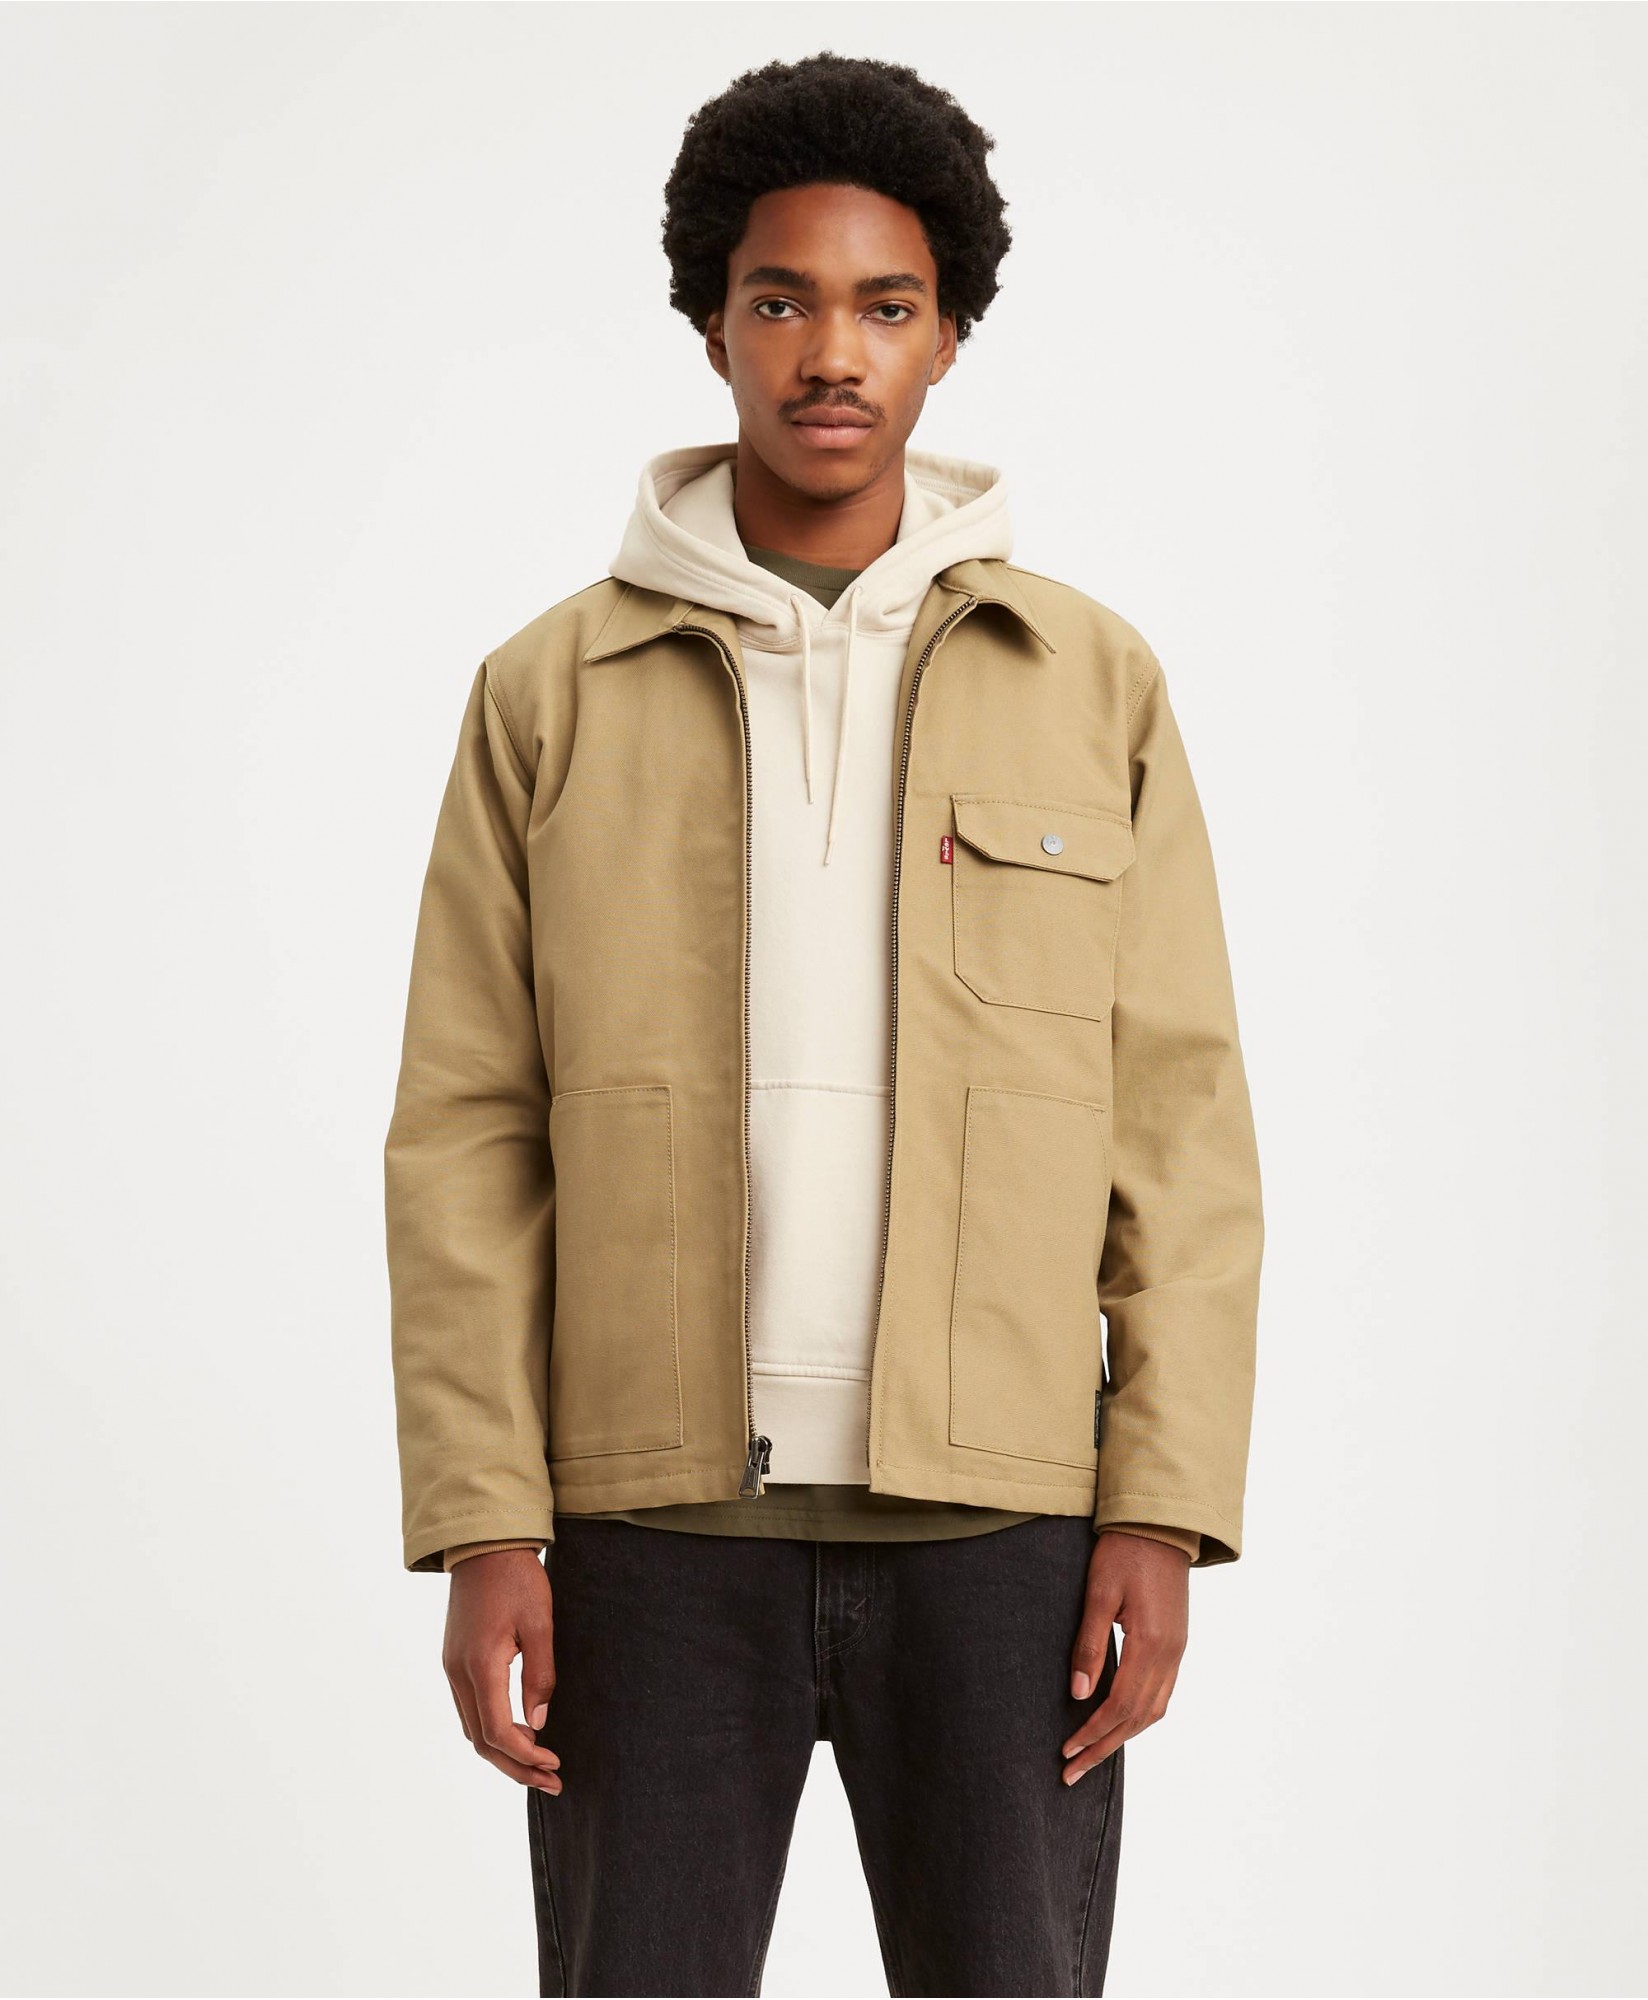 THERMORE WALLER WORKER JACKET